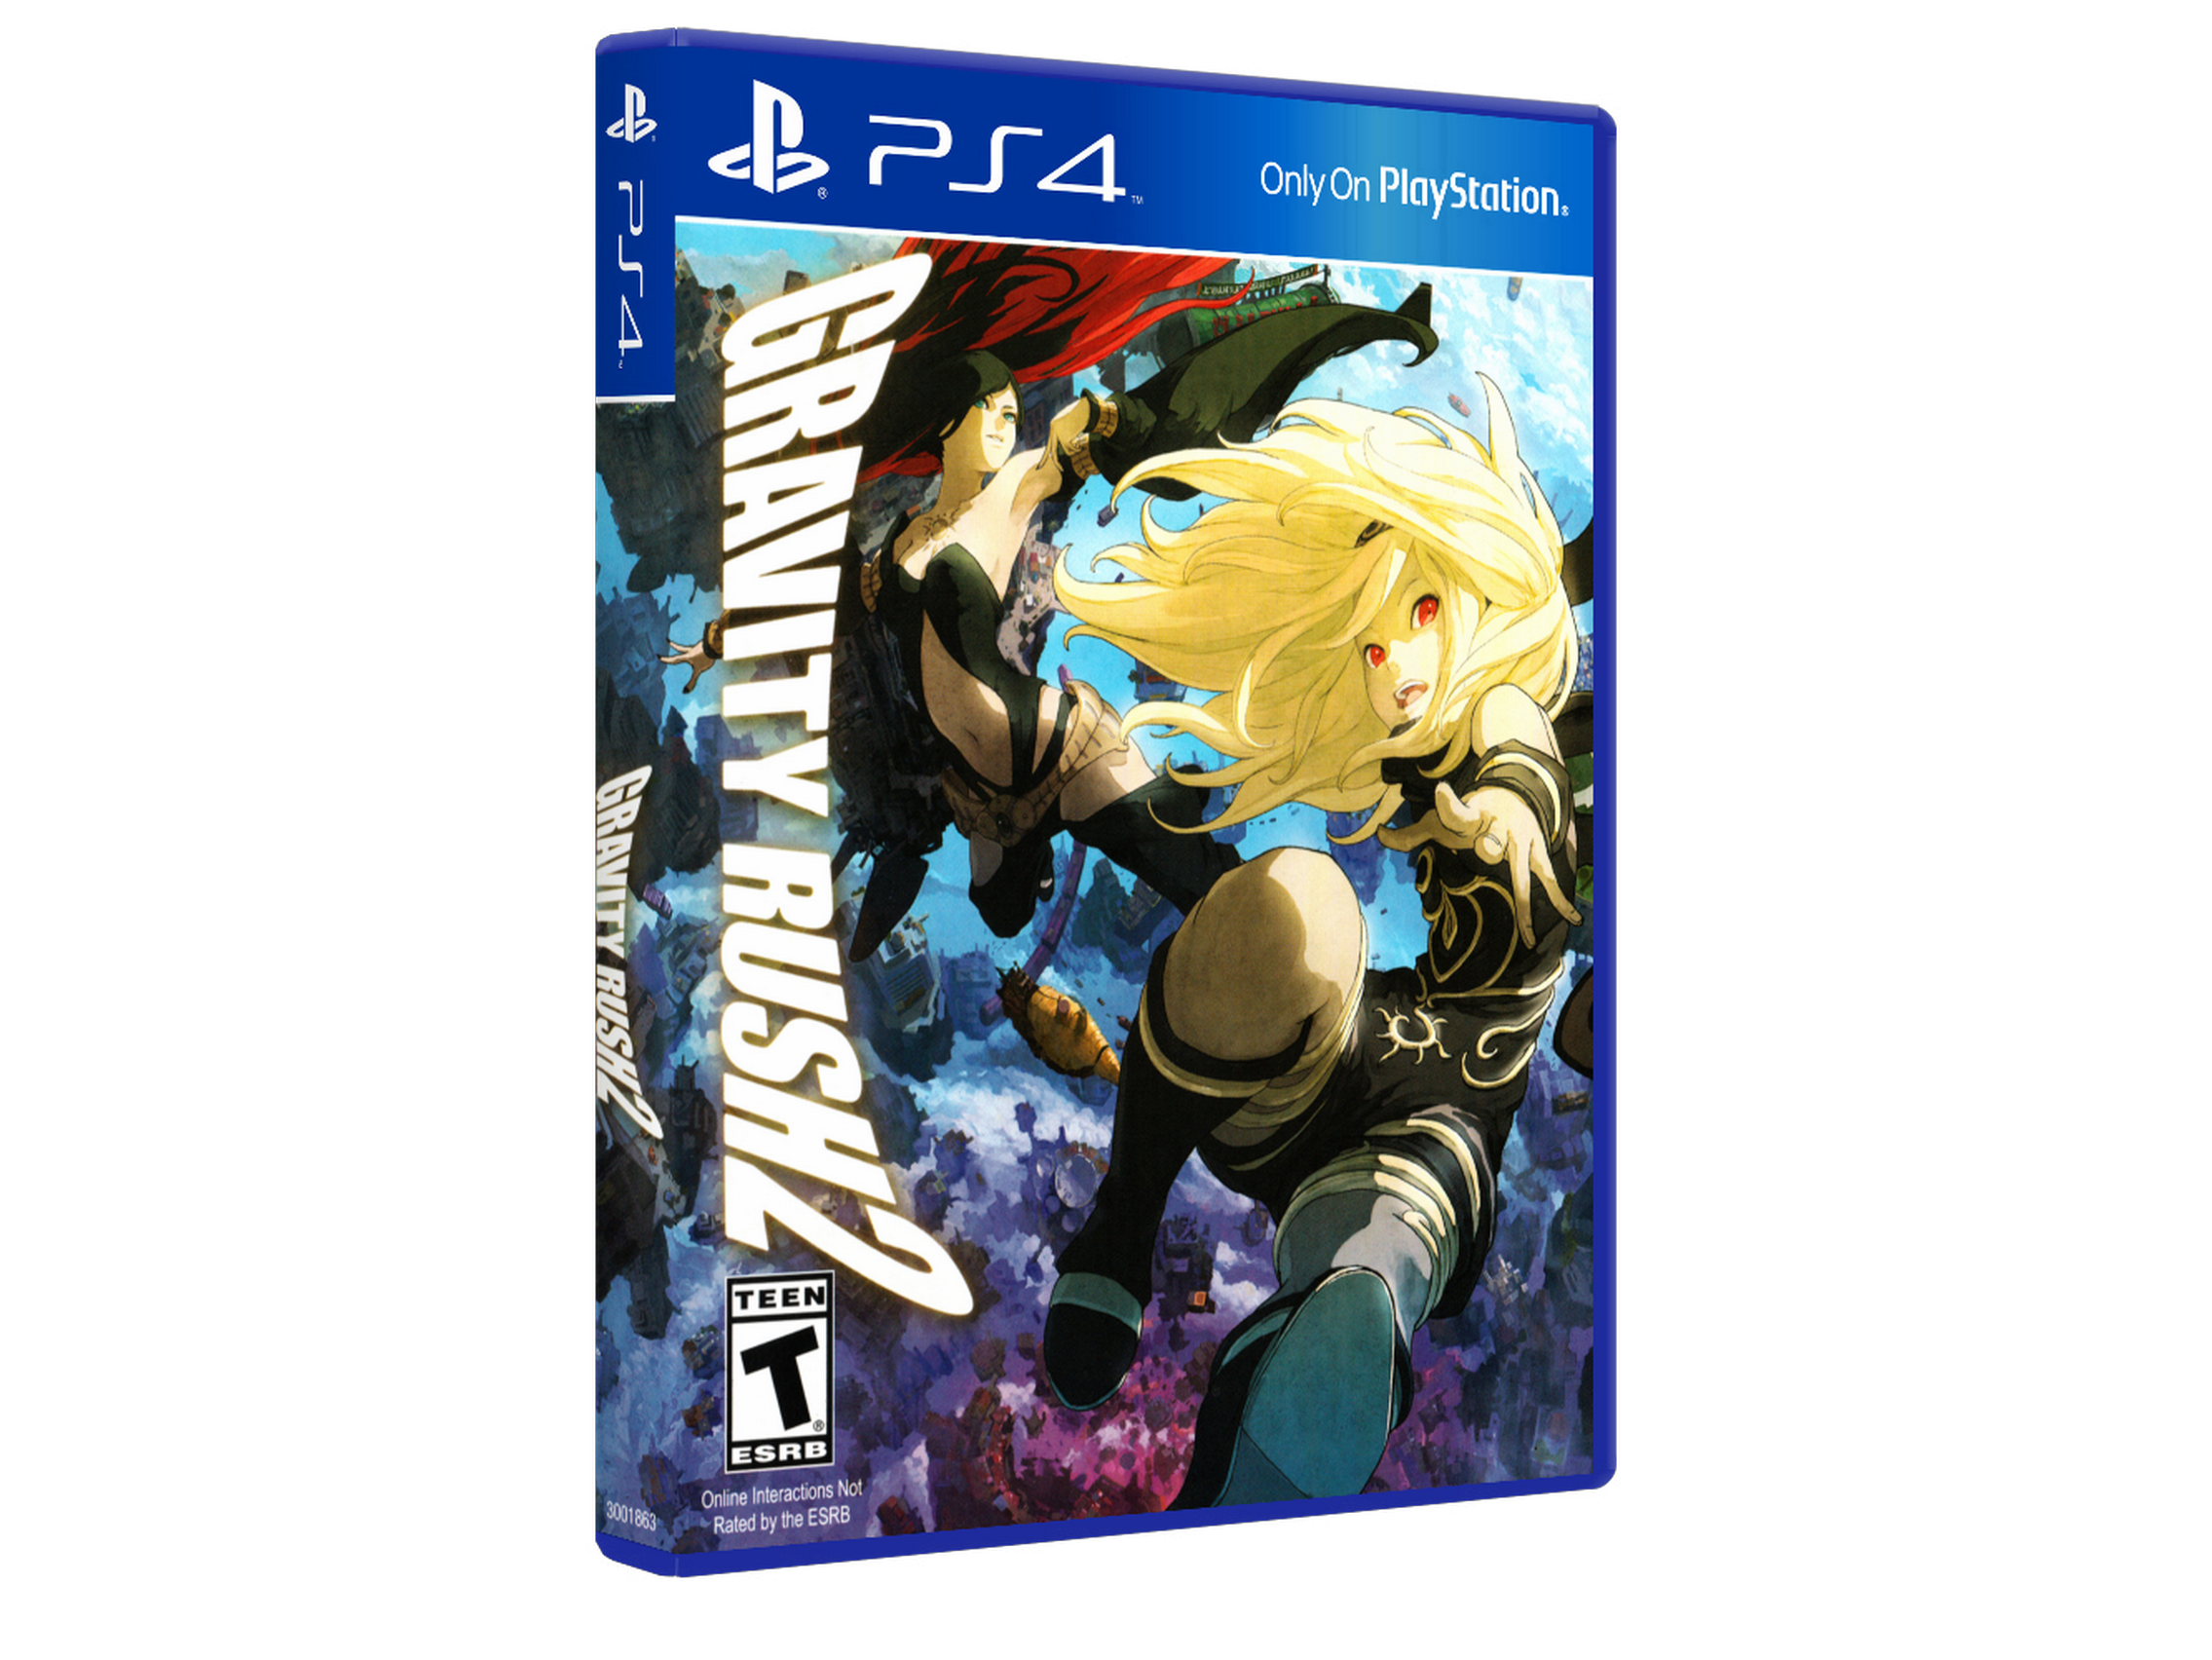 Action Fight Game 46/"x24/" Poster 004 Gravity Rush 2